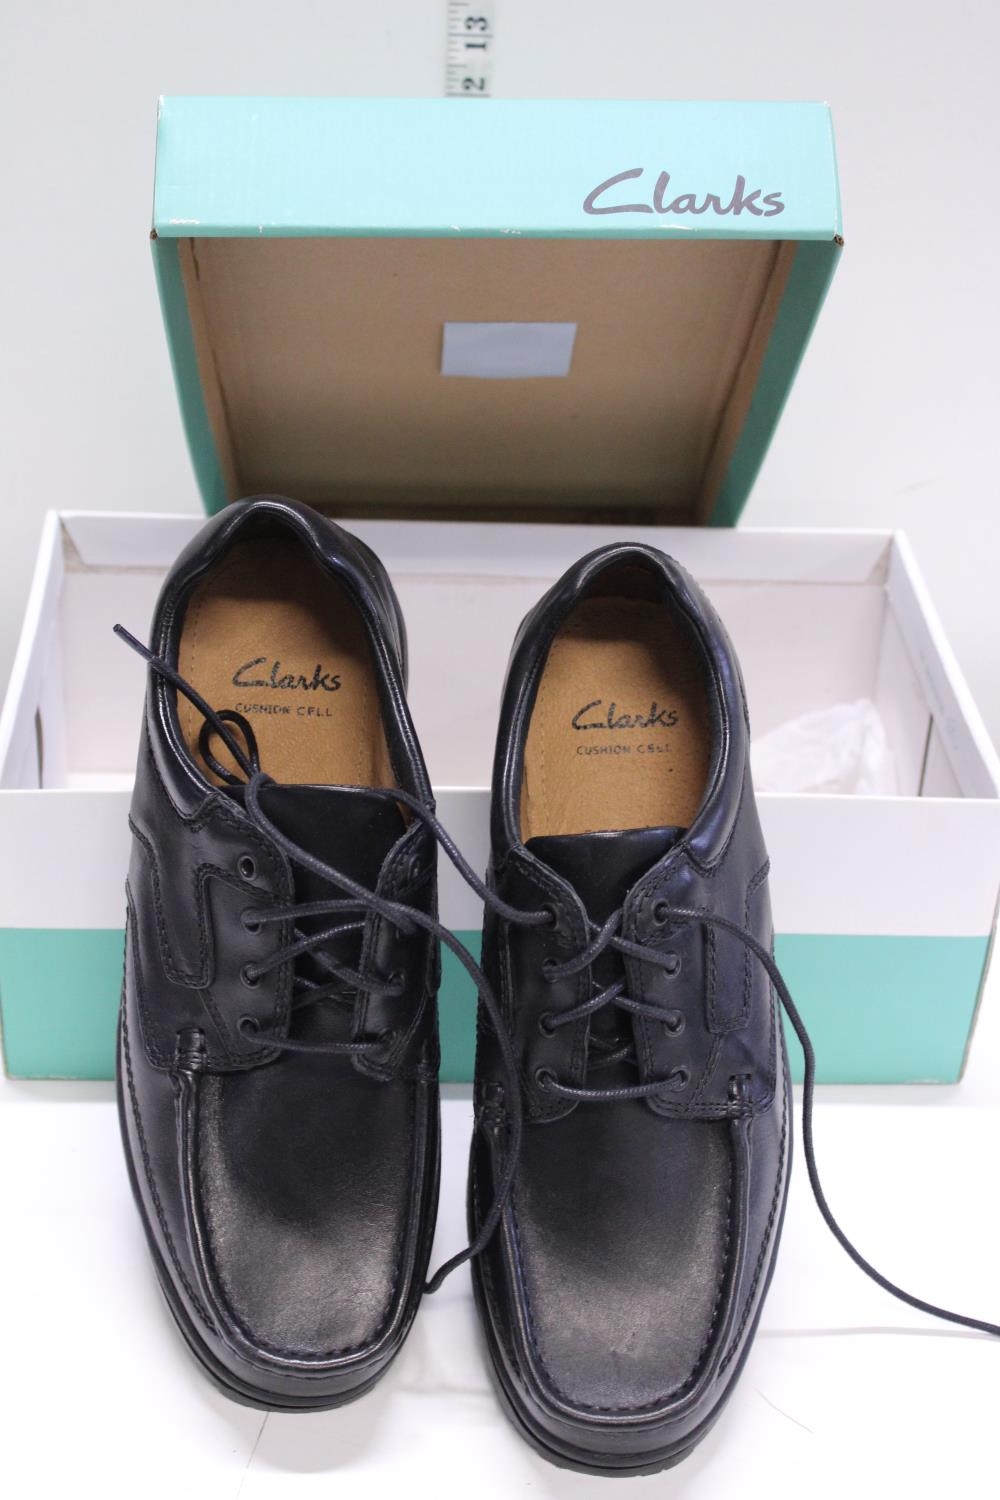 A new pair of Clarks shoes size 9